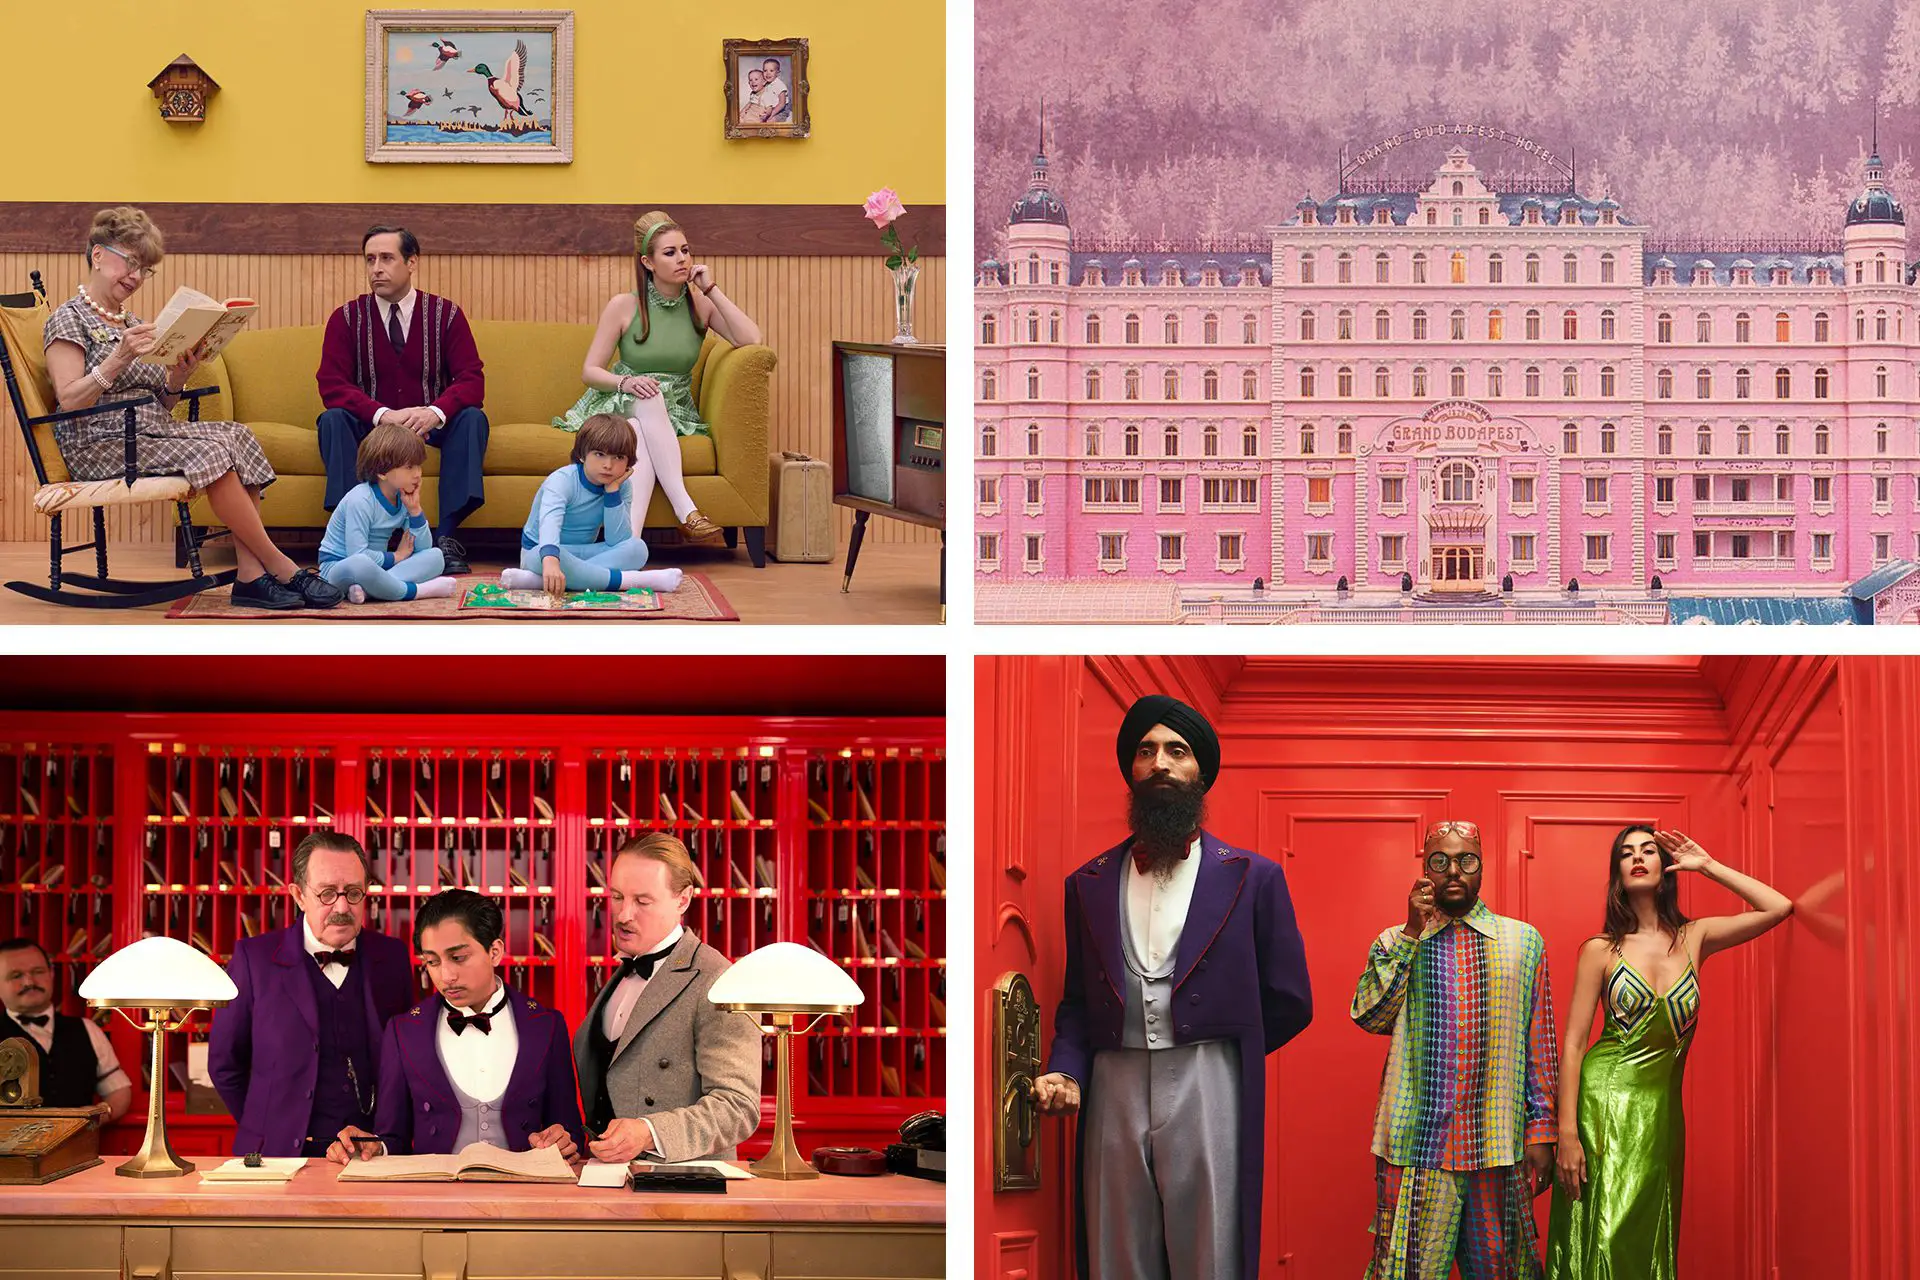 TheSocialTalks - A Breakdown of Wes Anderson's Whimsical